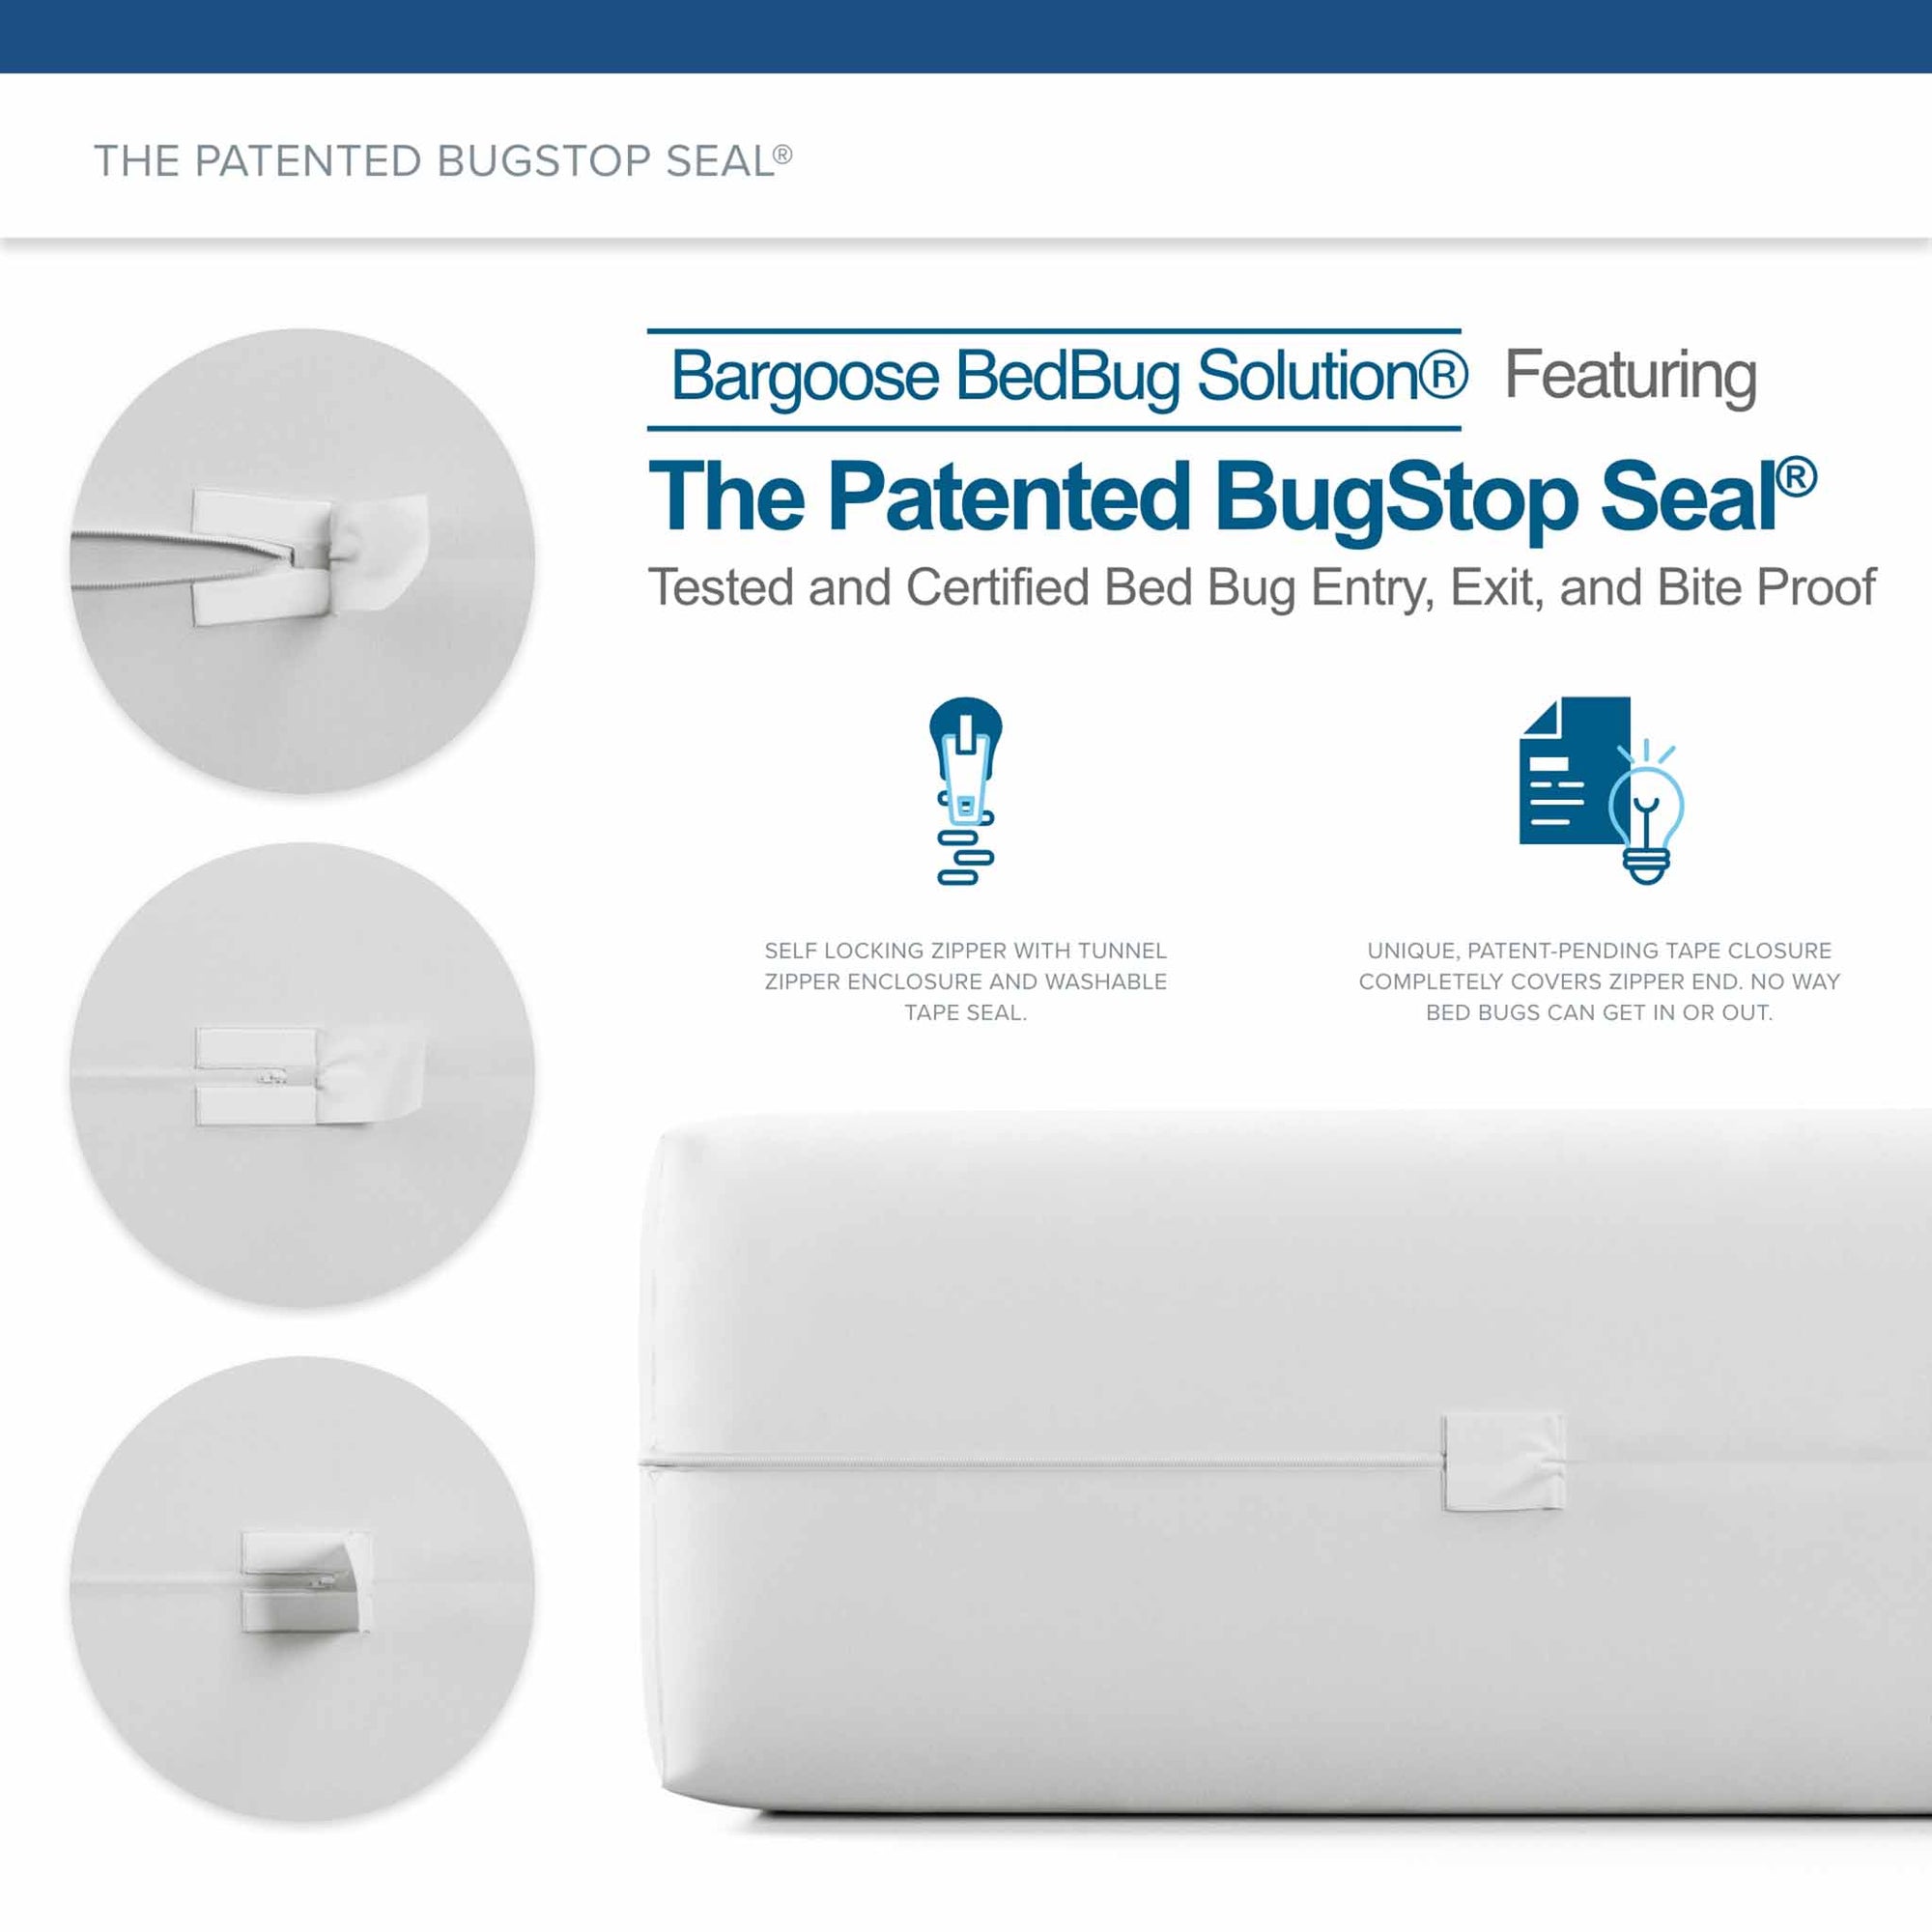 BedBug Solution™ covers include the patented Bugstop® Seal, which is tested and certified as escape and entry proof.  Not only can those “unwanted guests” not bite you, but they also cannot escape.  You can be sure that you can sleep tight, and the bed bugs will not bite!